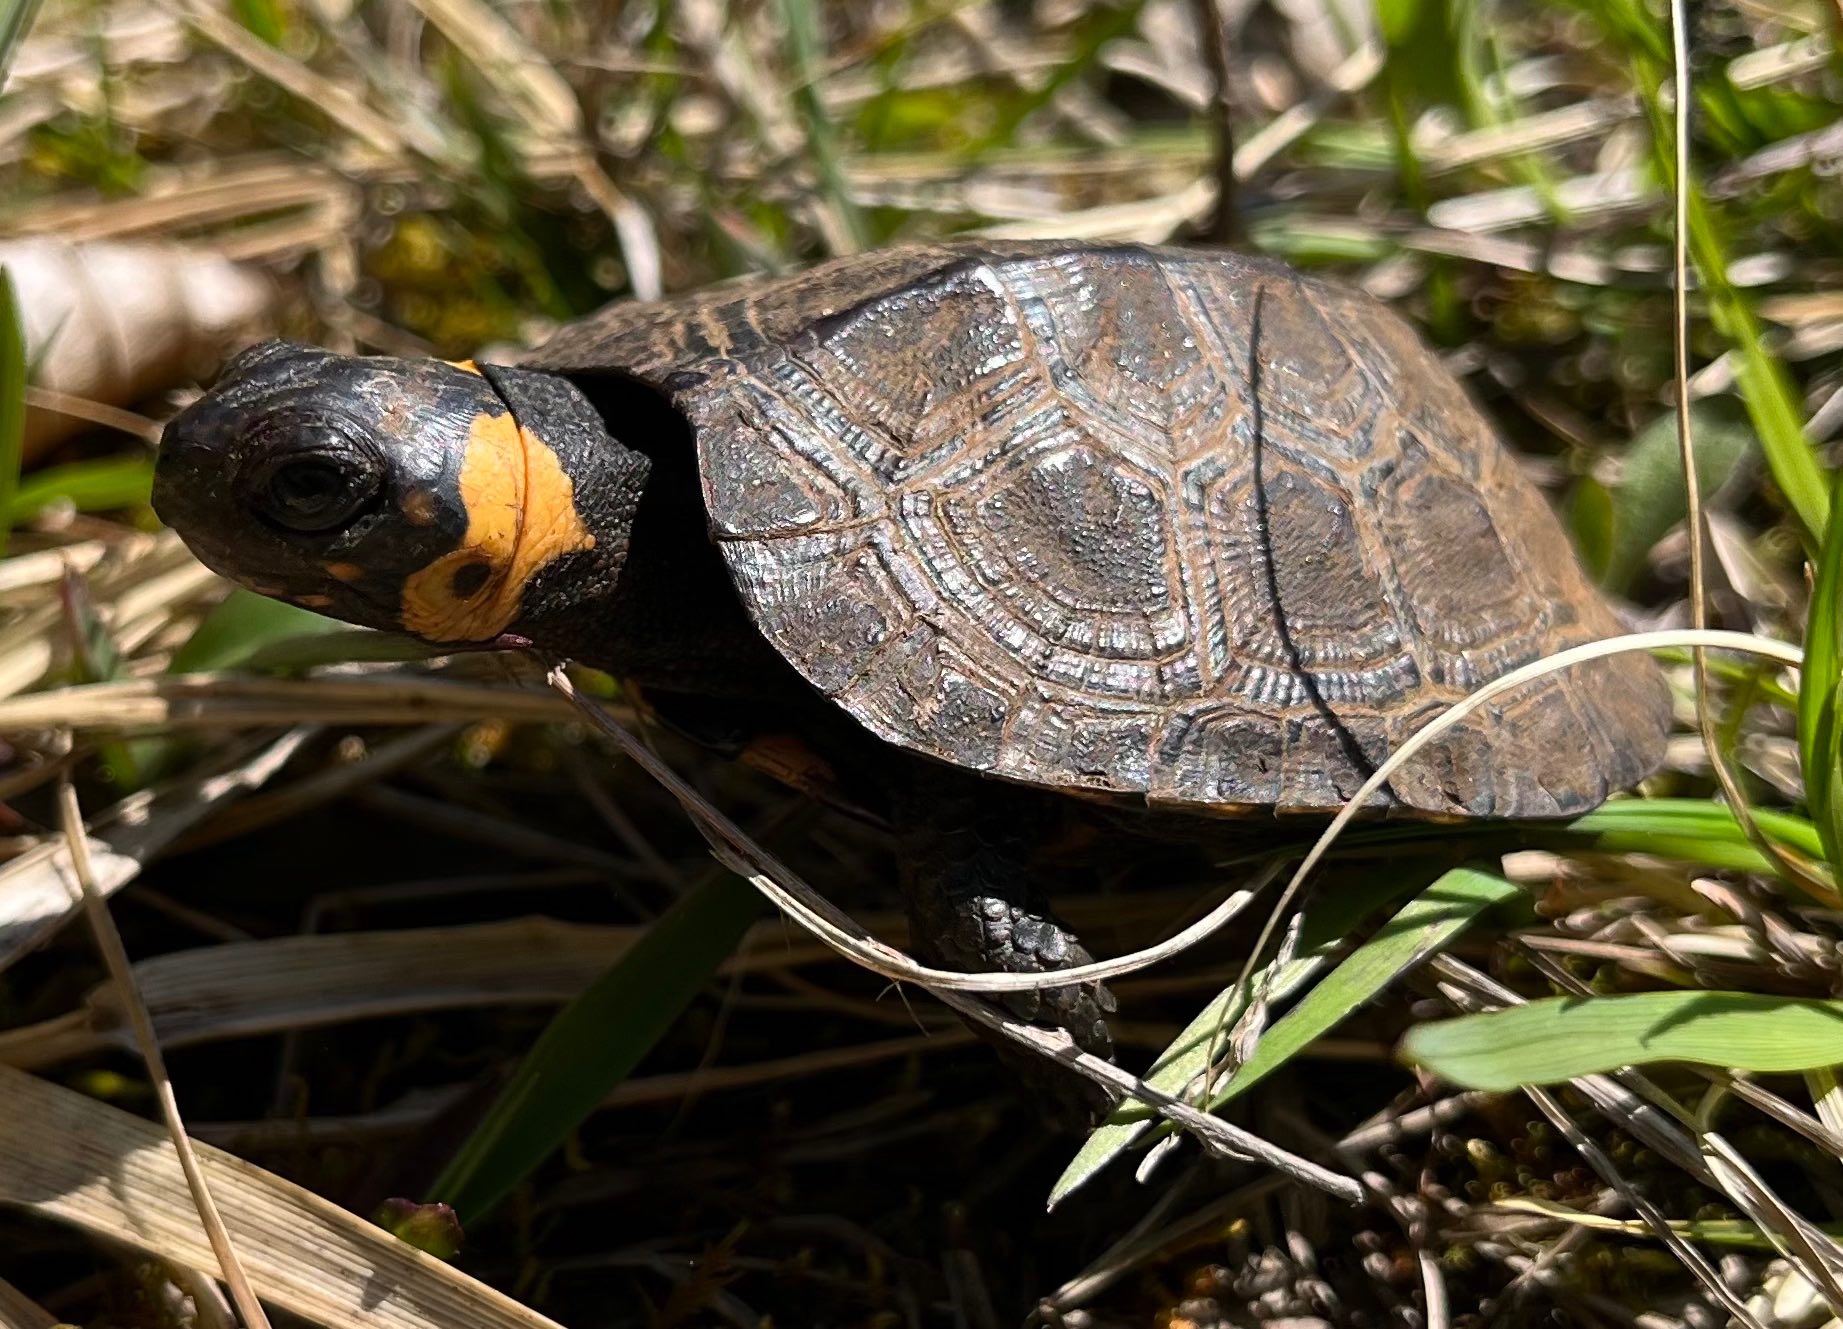 Little turtle in the grass